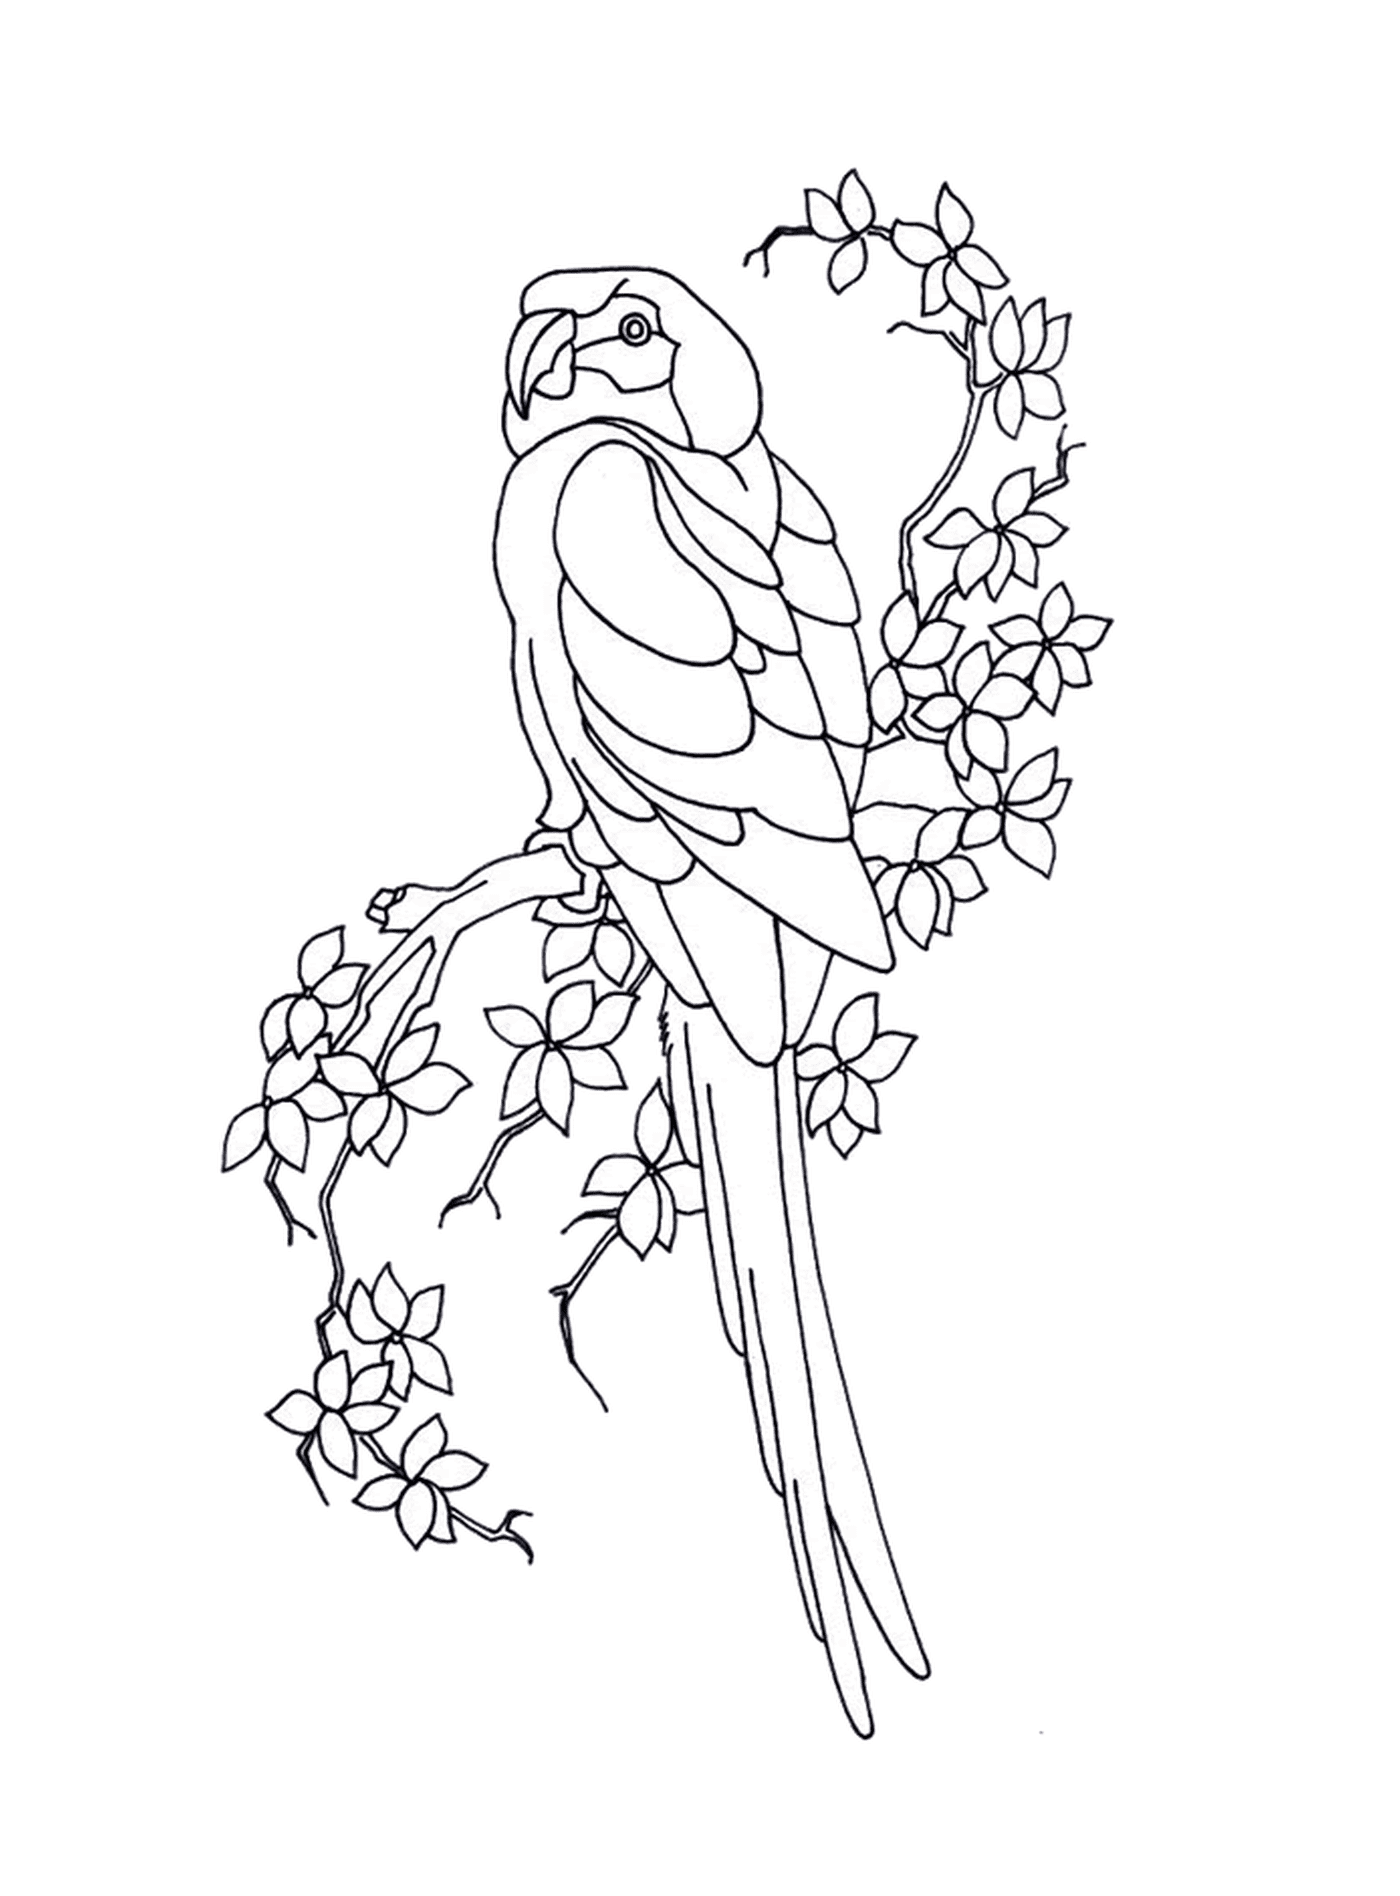  Parrot on a branch with flowers 